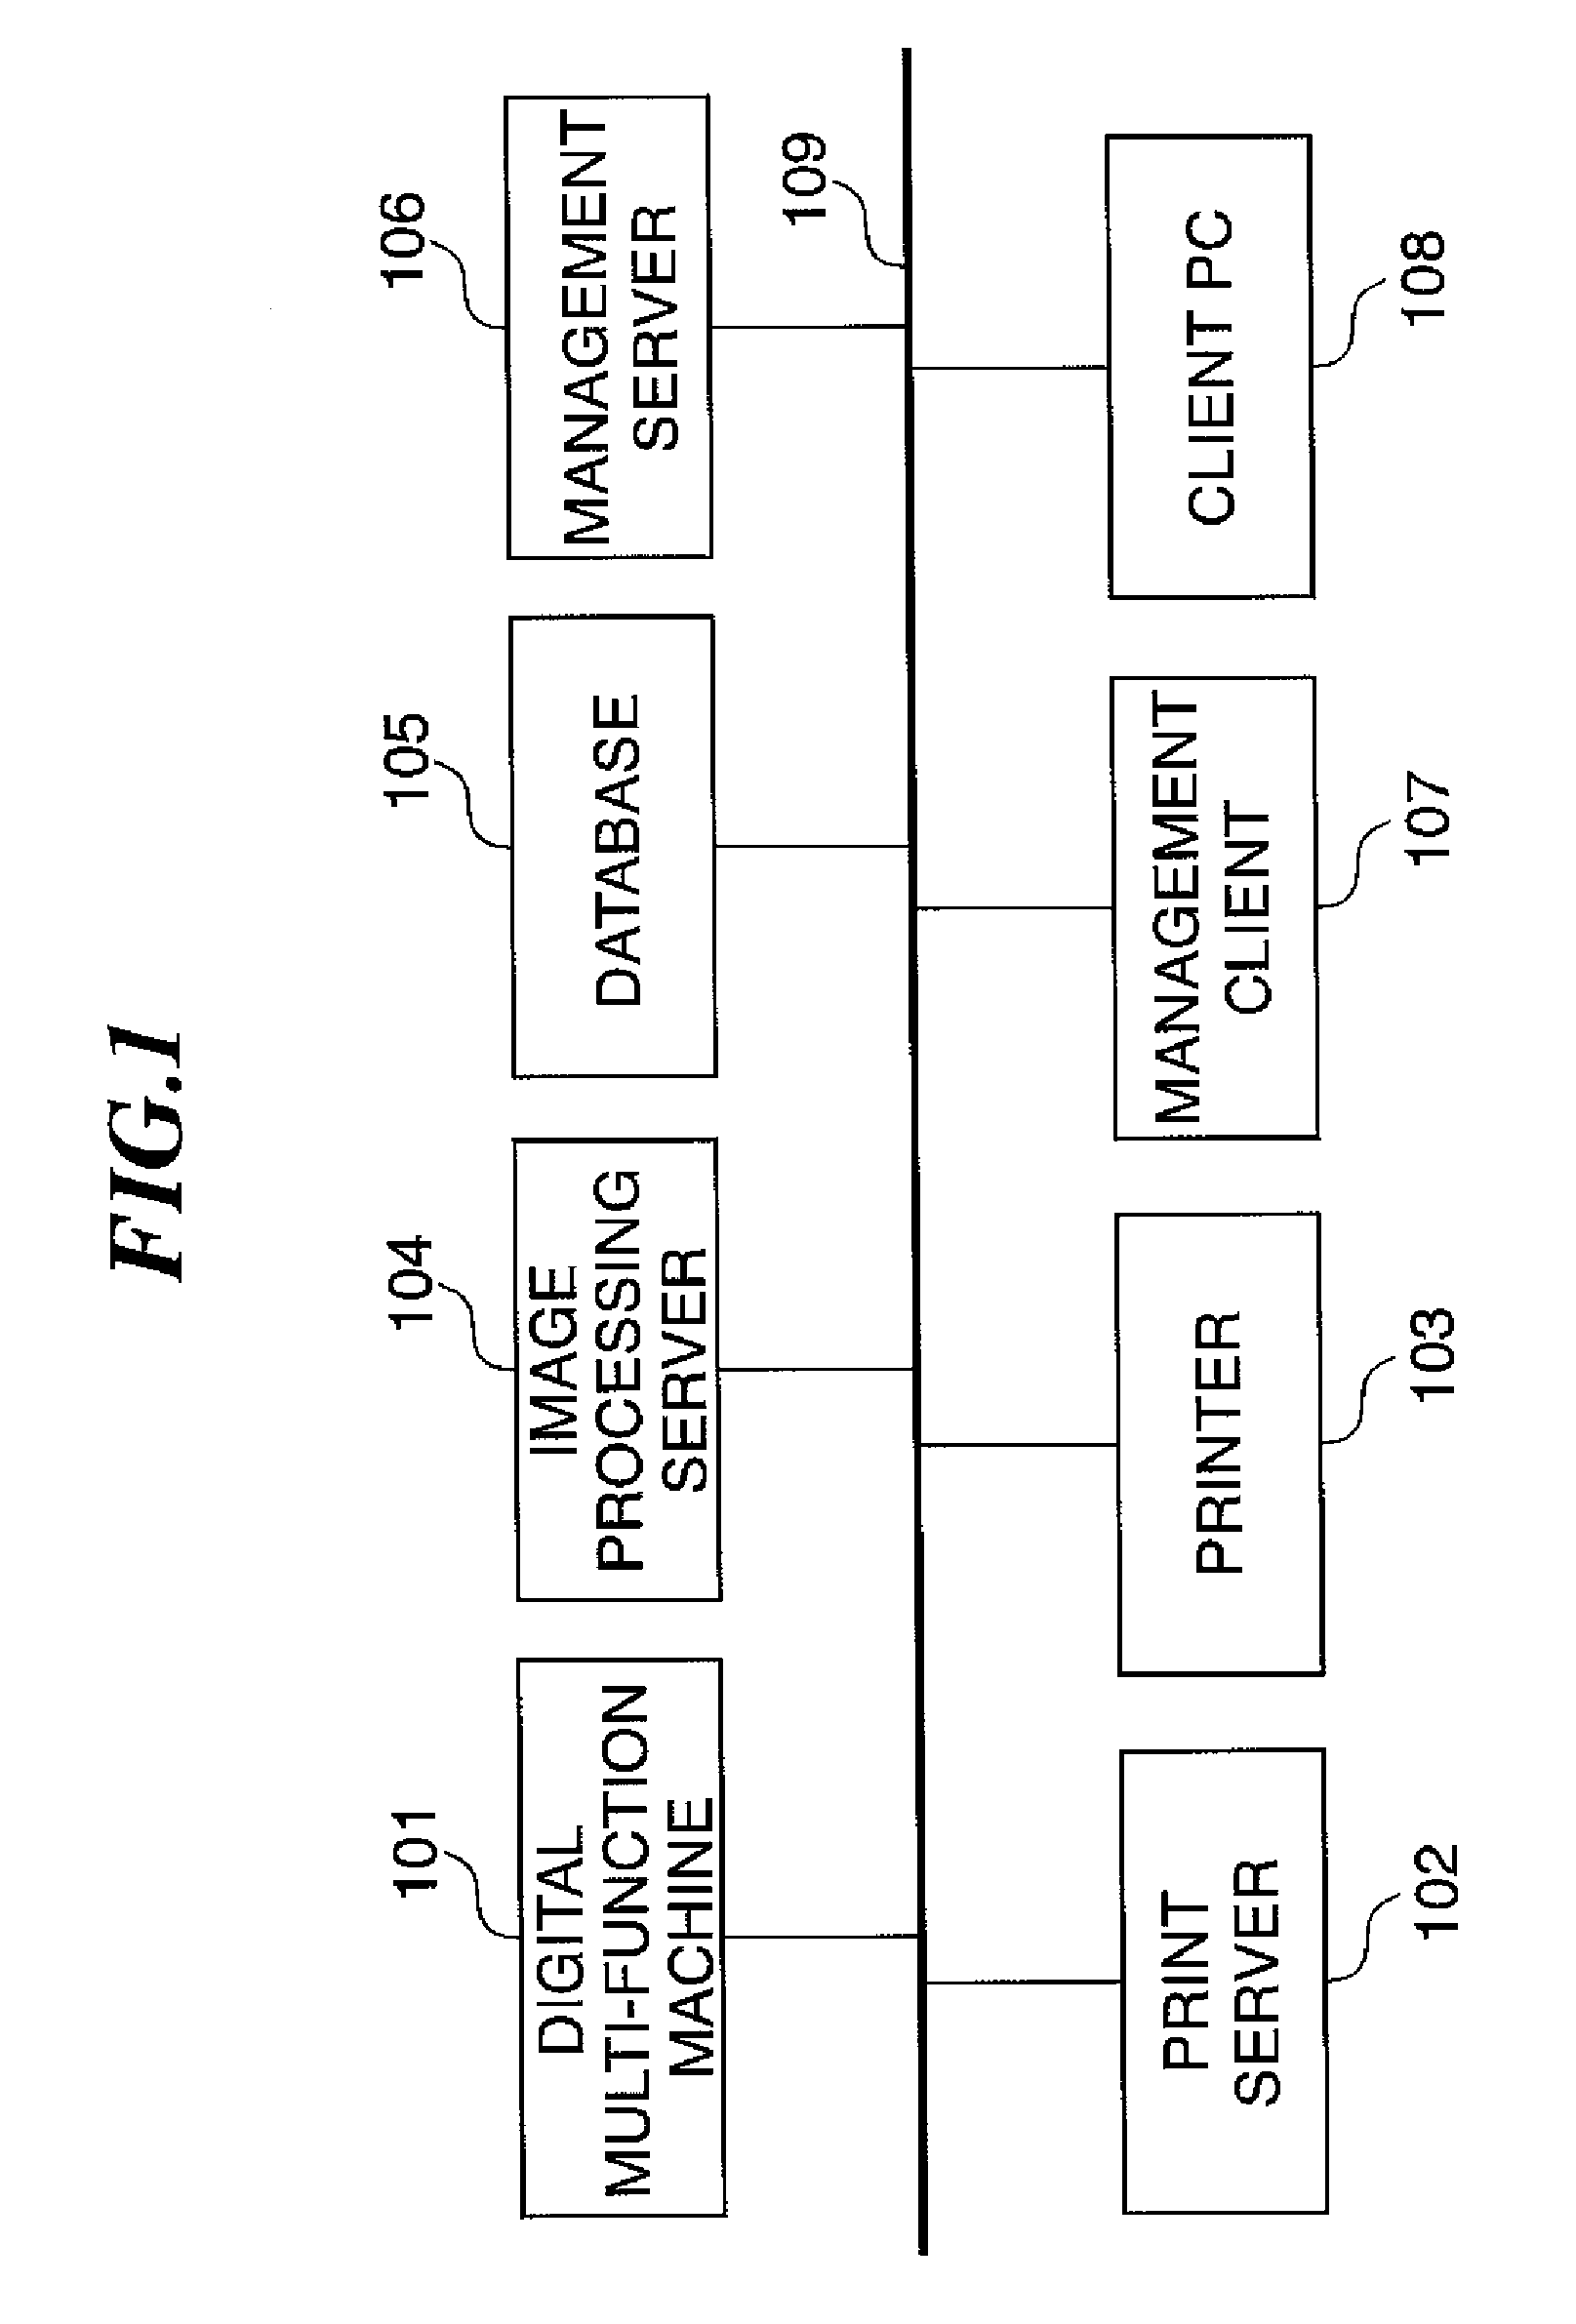 Image log recording system, control method therefor, and storage medium storing a control program therefor, that store image logs and control transfer settings for transmitting image logs to an image processing server